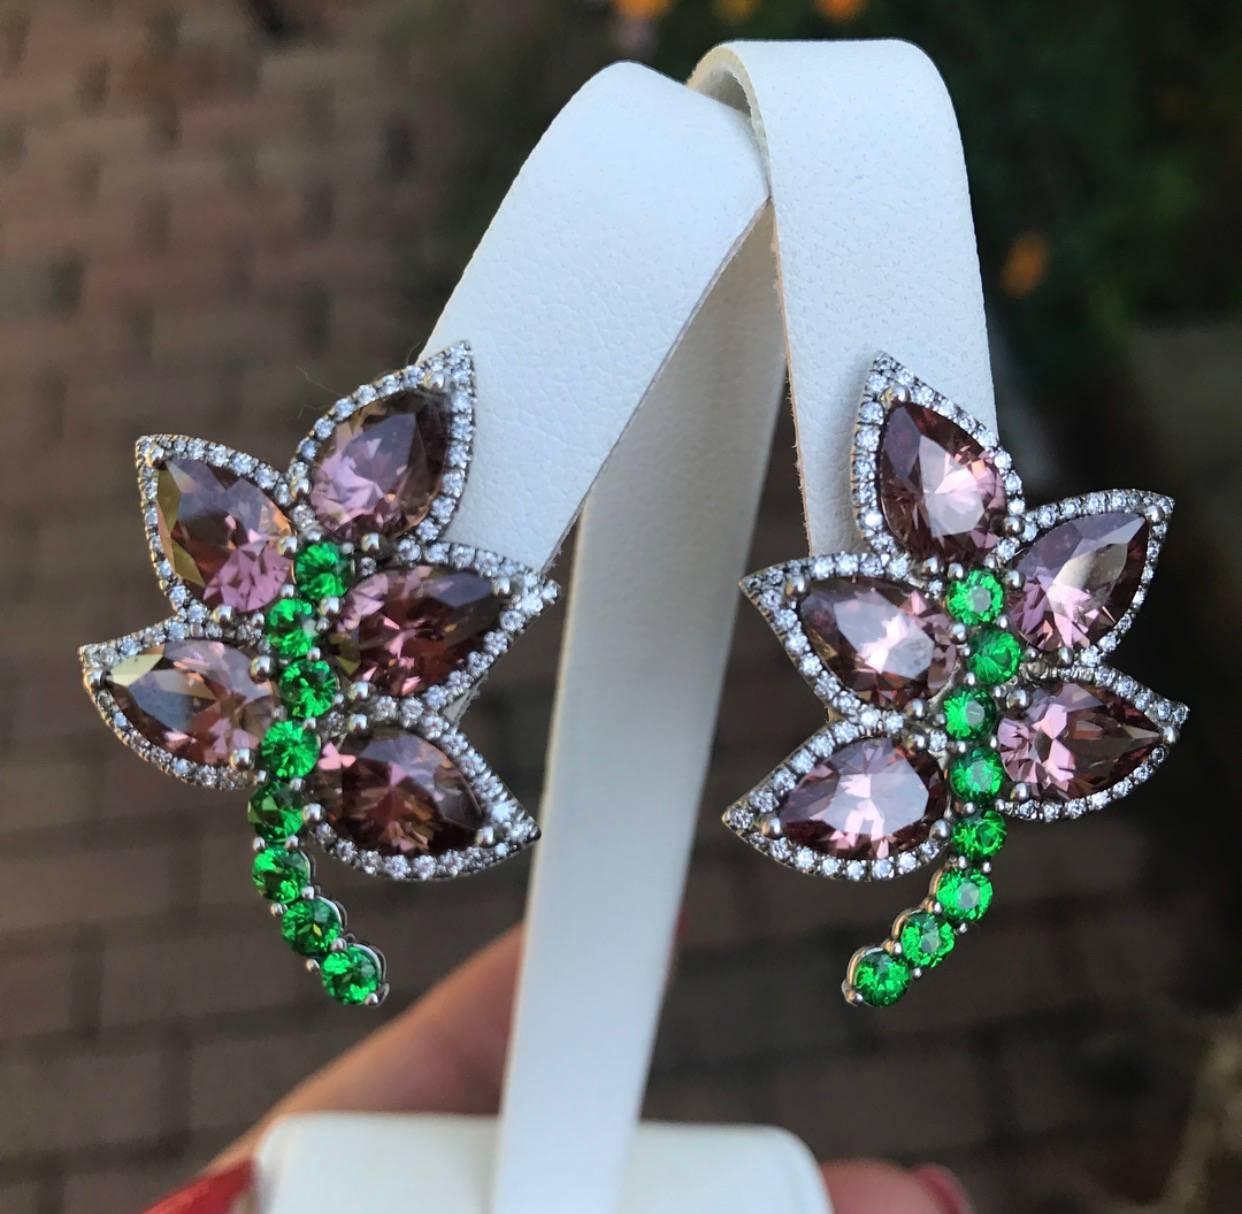   Perfectly Matched Natural   Blush  Color Zircons and  Centered with  Tsavorite Garnets, Accented with Colorless Diamonds, Makes Dramatic Color Combination For these Unique Earrings, Made in 18 K white Gold with Black Rhodium Plating, One of a